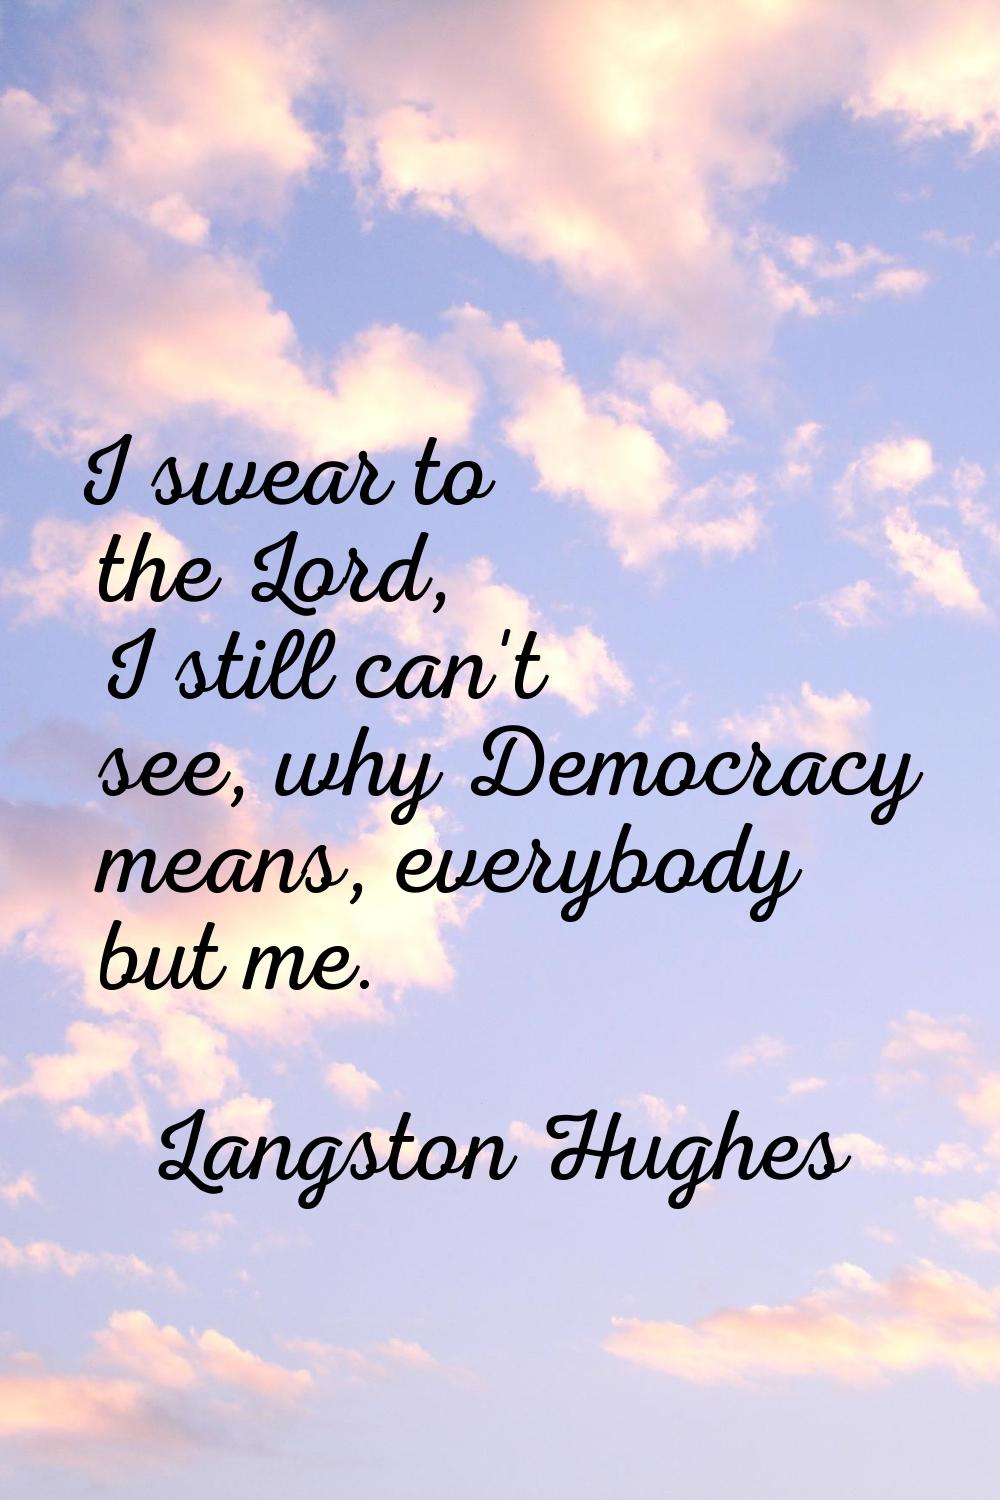 I swear to the Lord, I still can't see, why Democracy means, everybody but me.